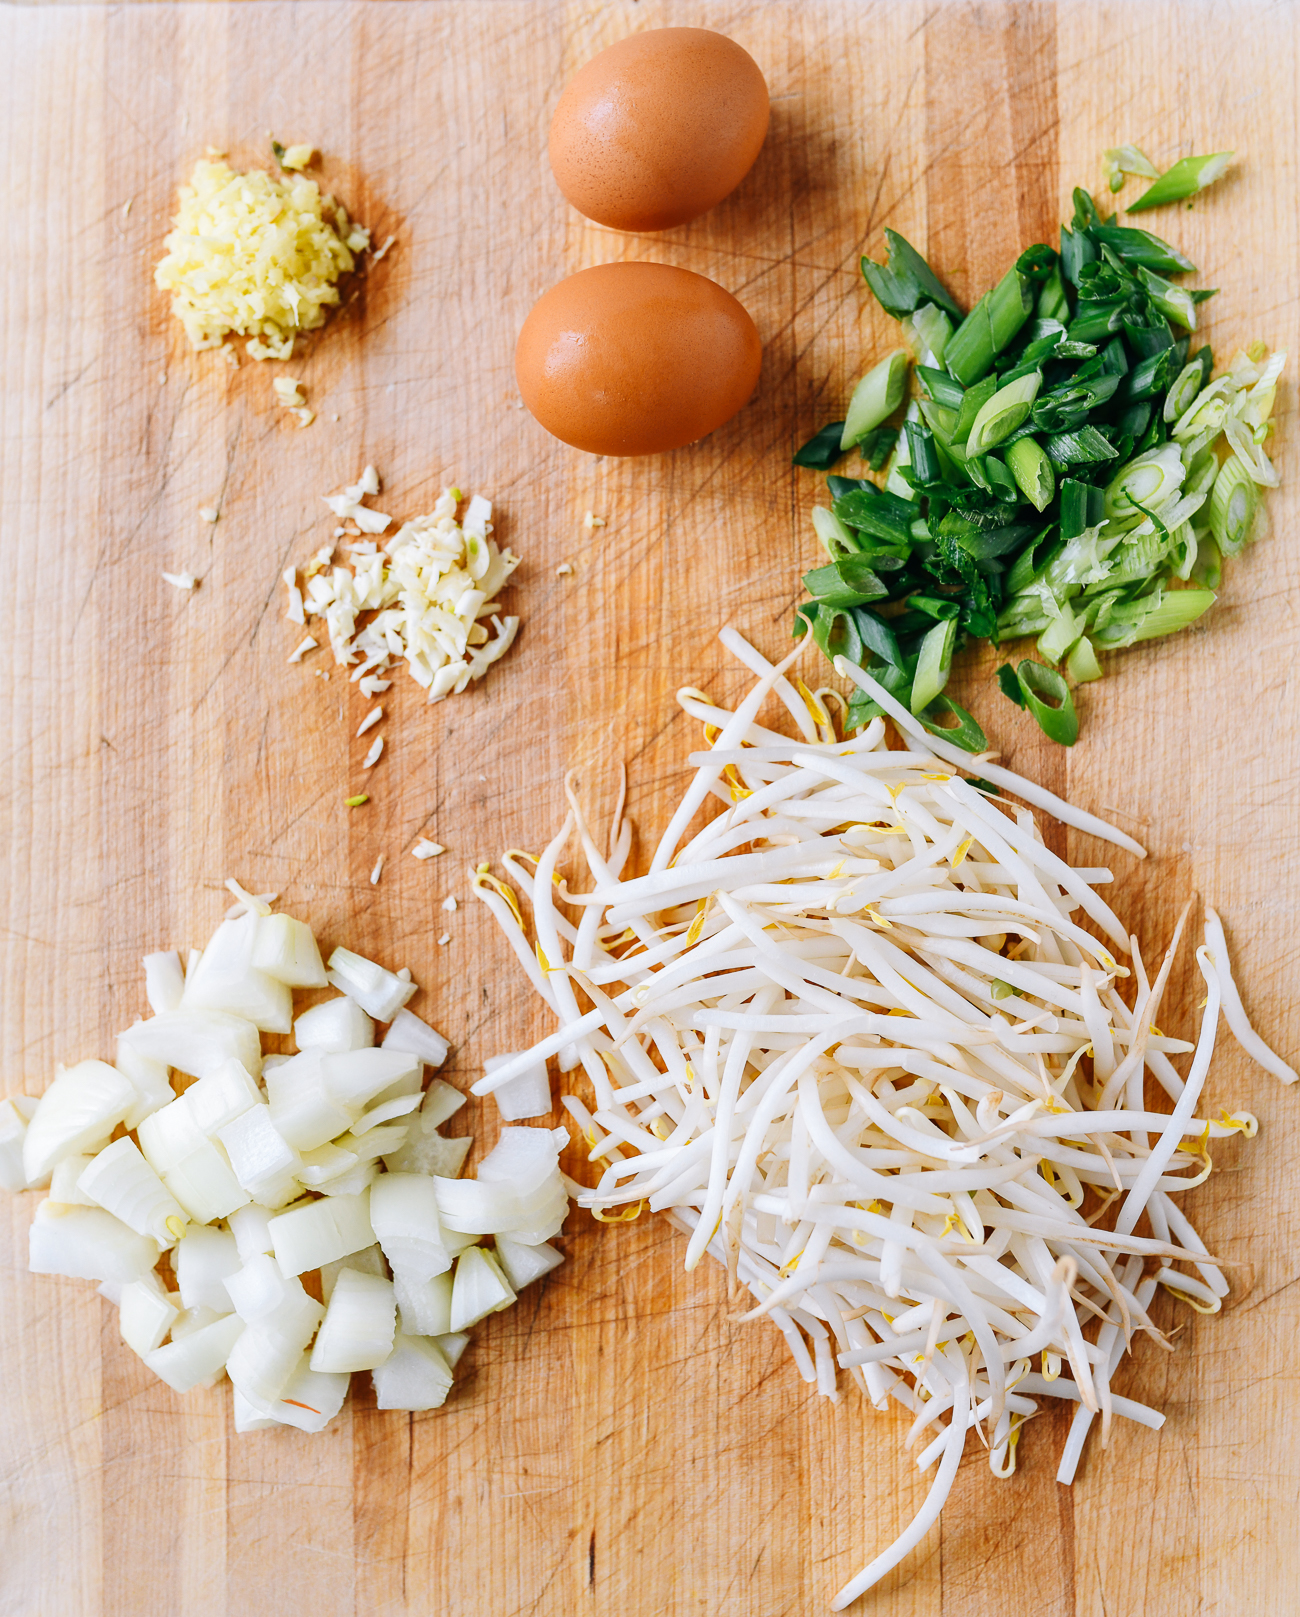 Ginger, garlic, eggs, scalions, mung bean sprouts, and onions